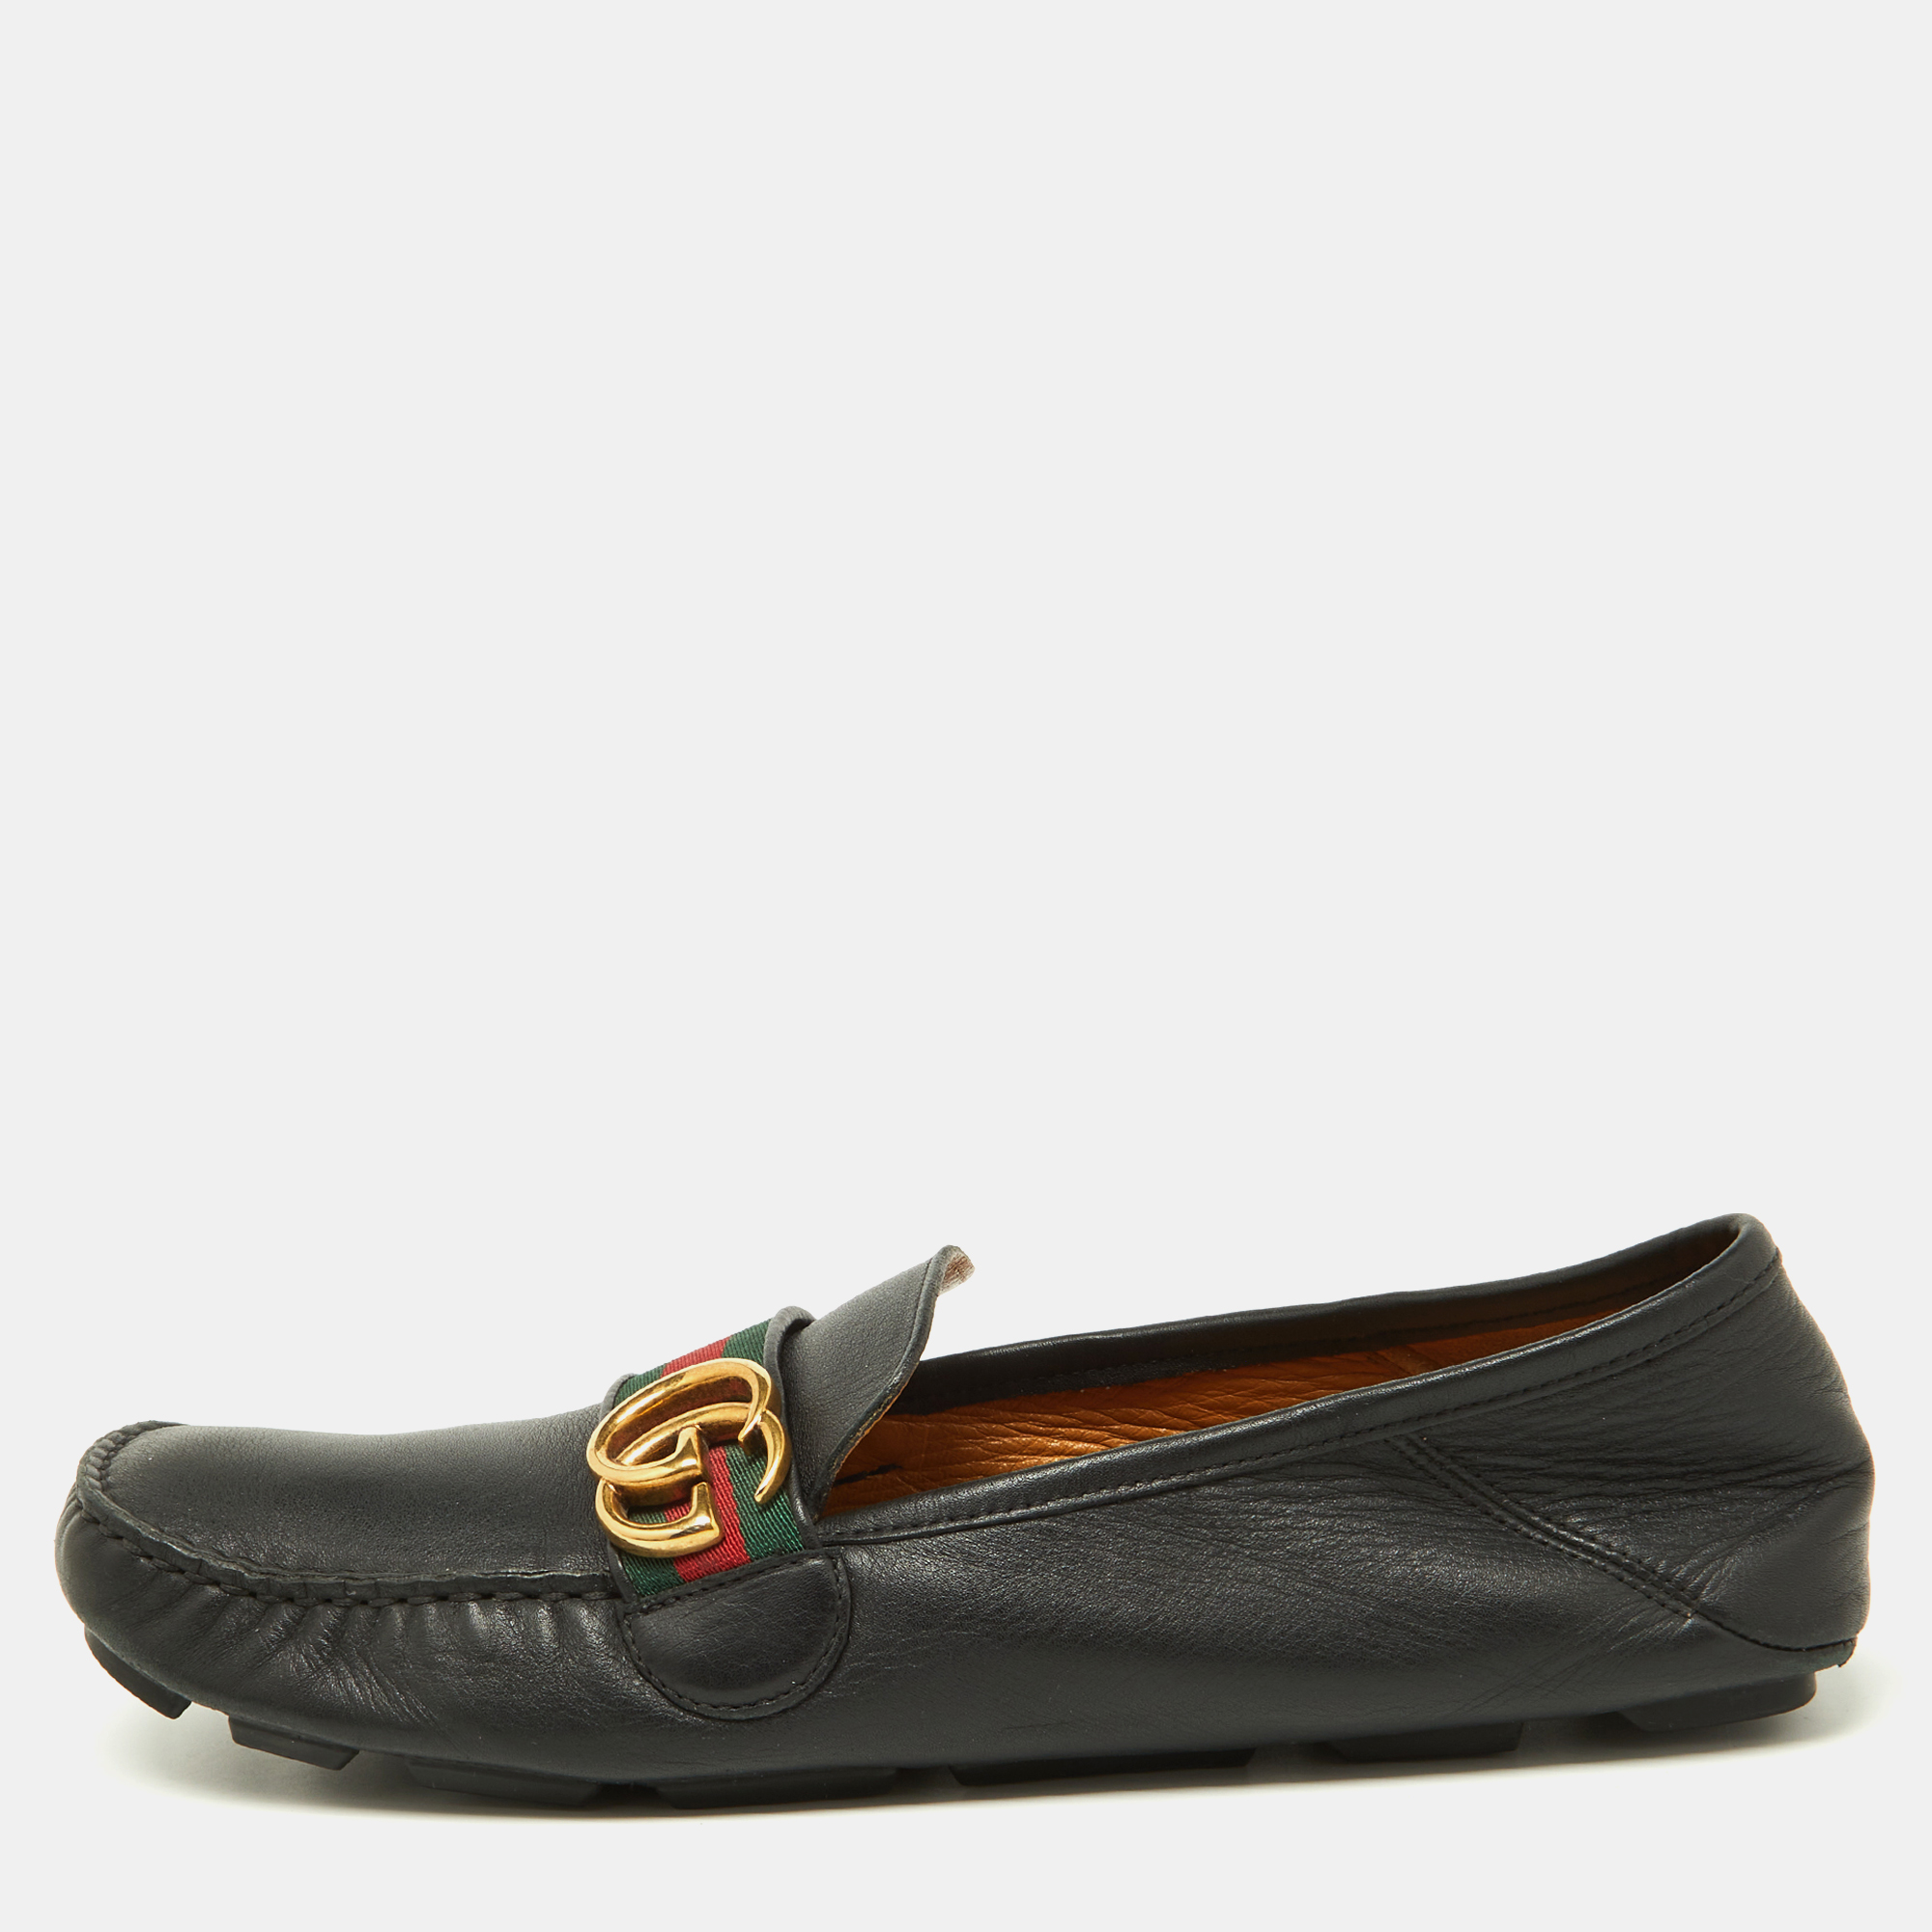 Gucci Black Leather GG Marmont Web Driver Slip On Loafers Size 43